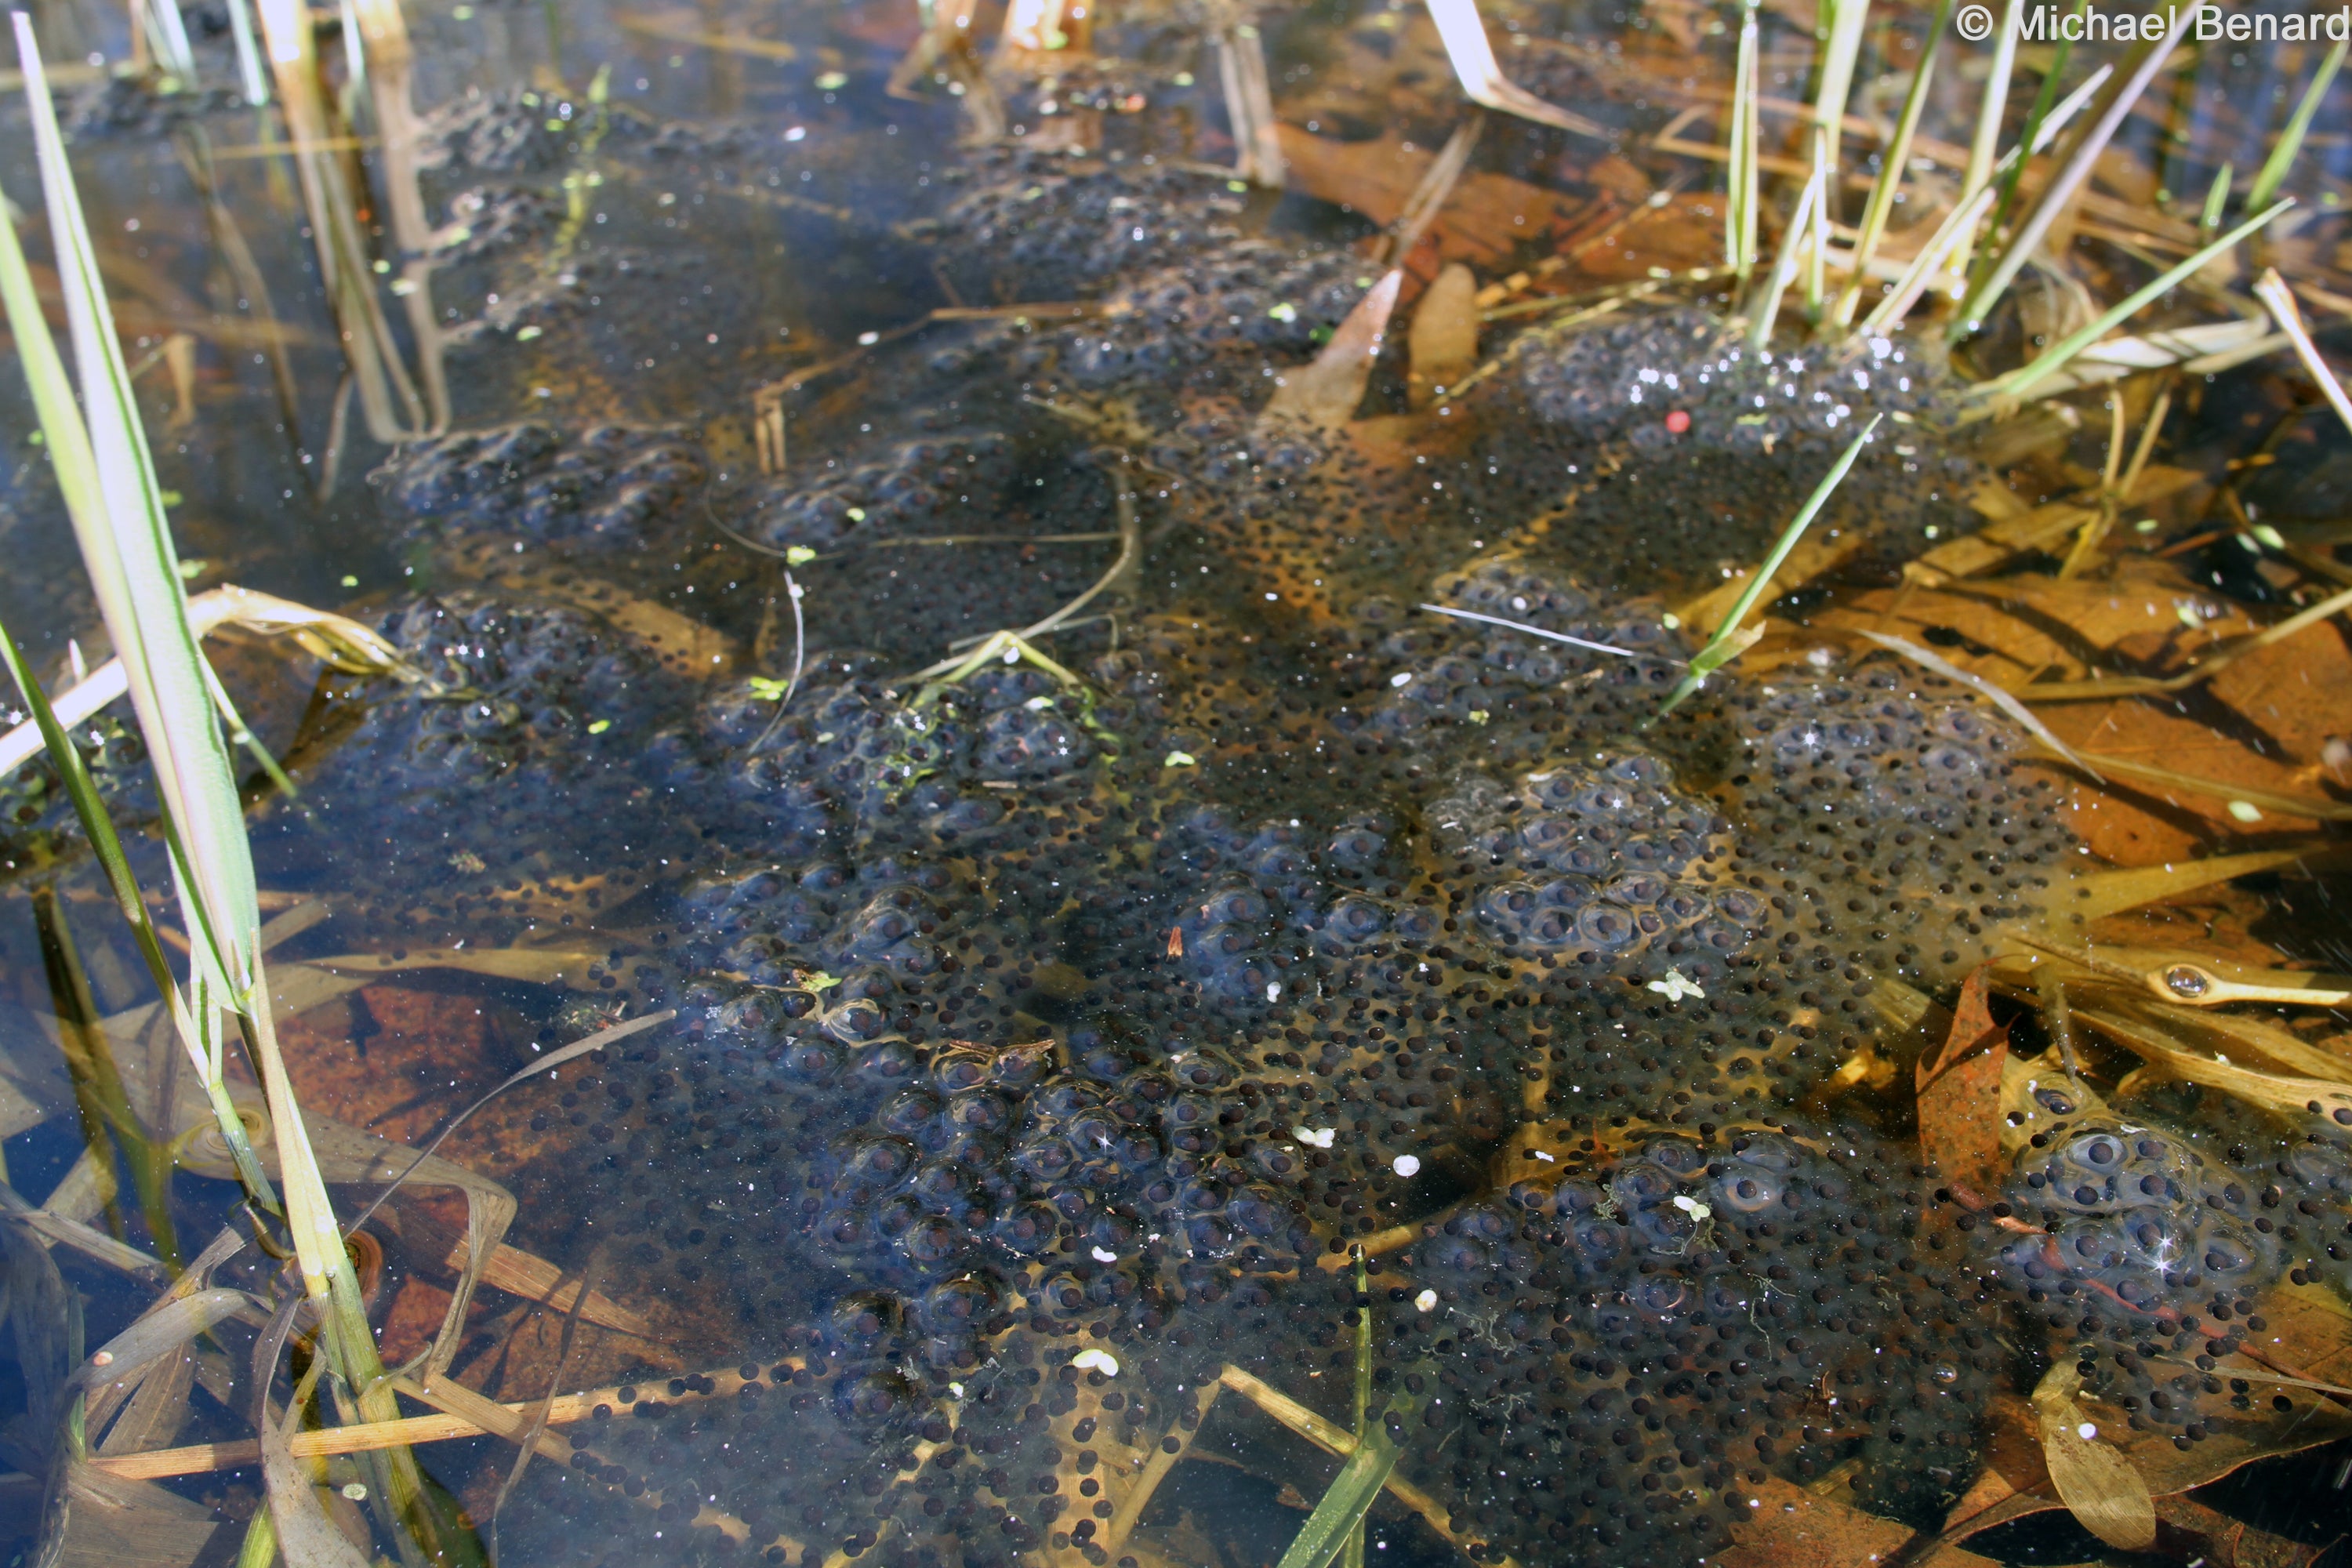 Wood Frogs Calling And Laying Eggs Week Of April 8 Edwin - 